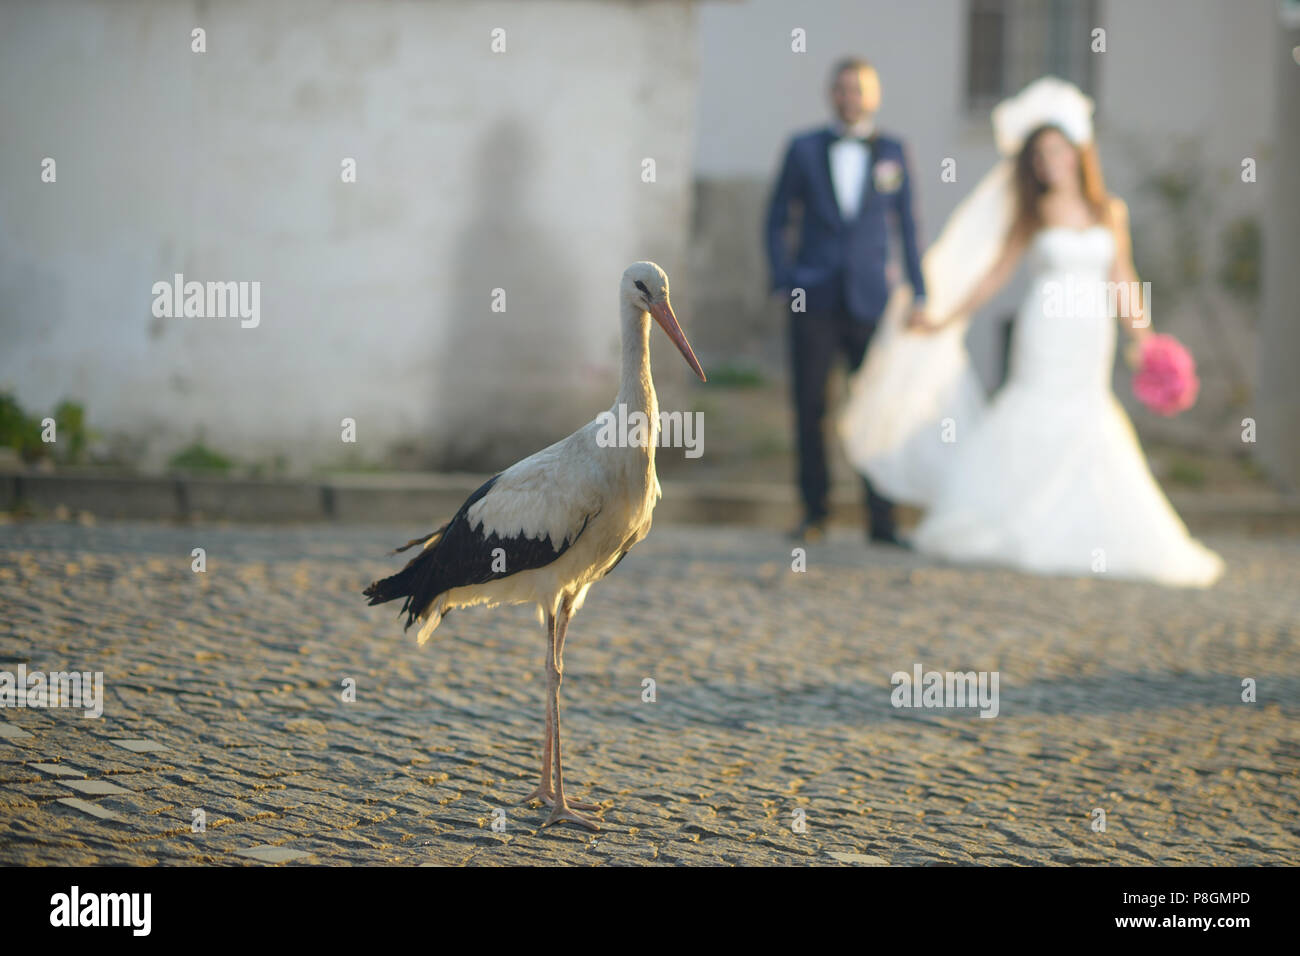 Stork shows up at the wedding by bride and groom, funny wedding photo Stock Photo